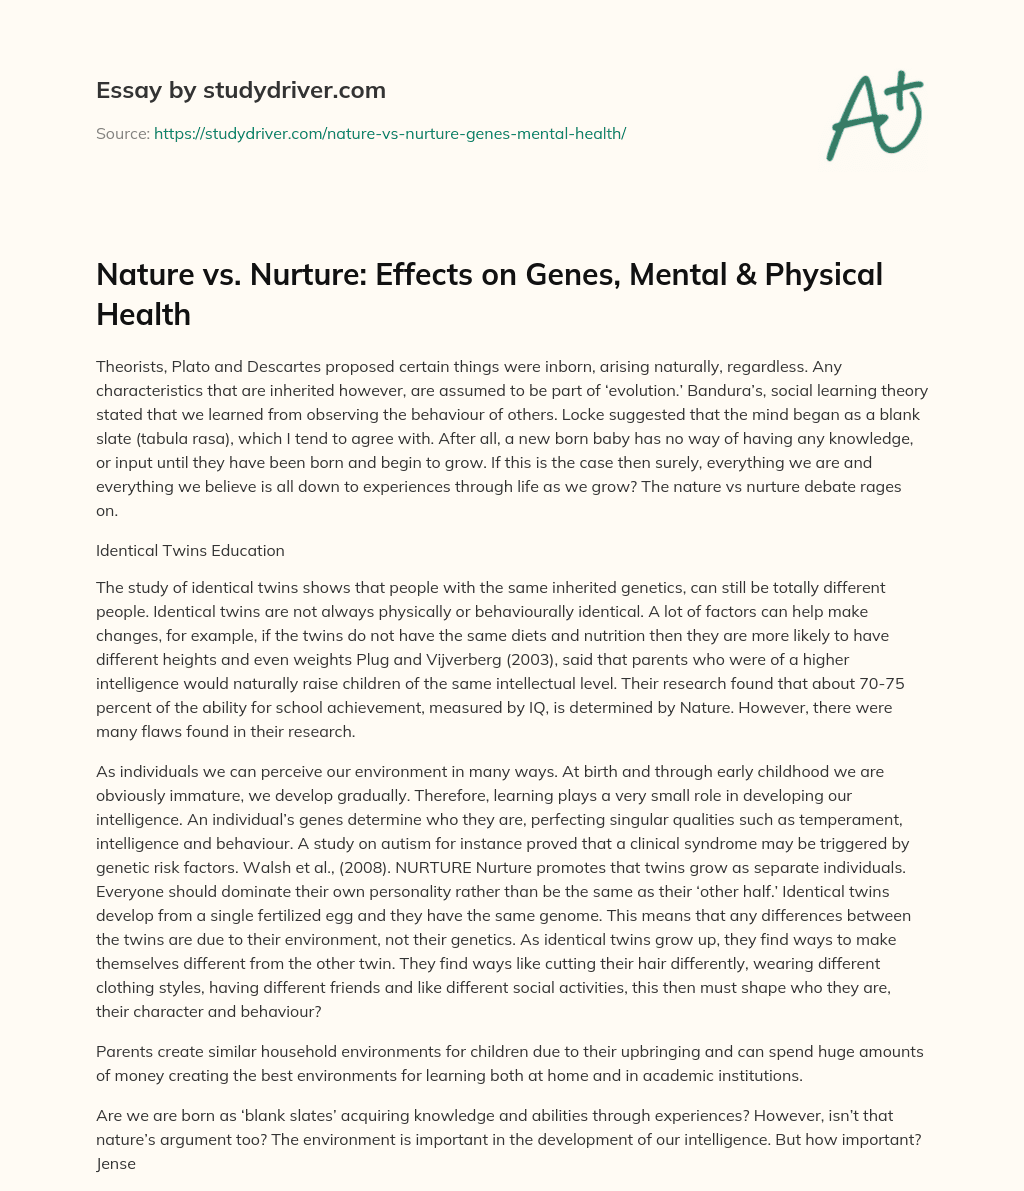 Nature Vs. Nurture: Effects on Genes, Mental & Physical Health essay